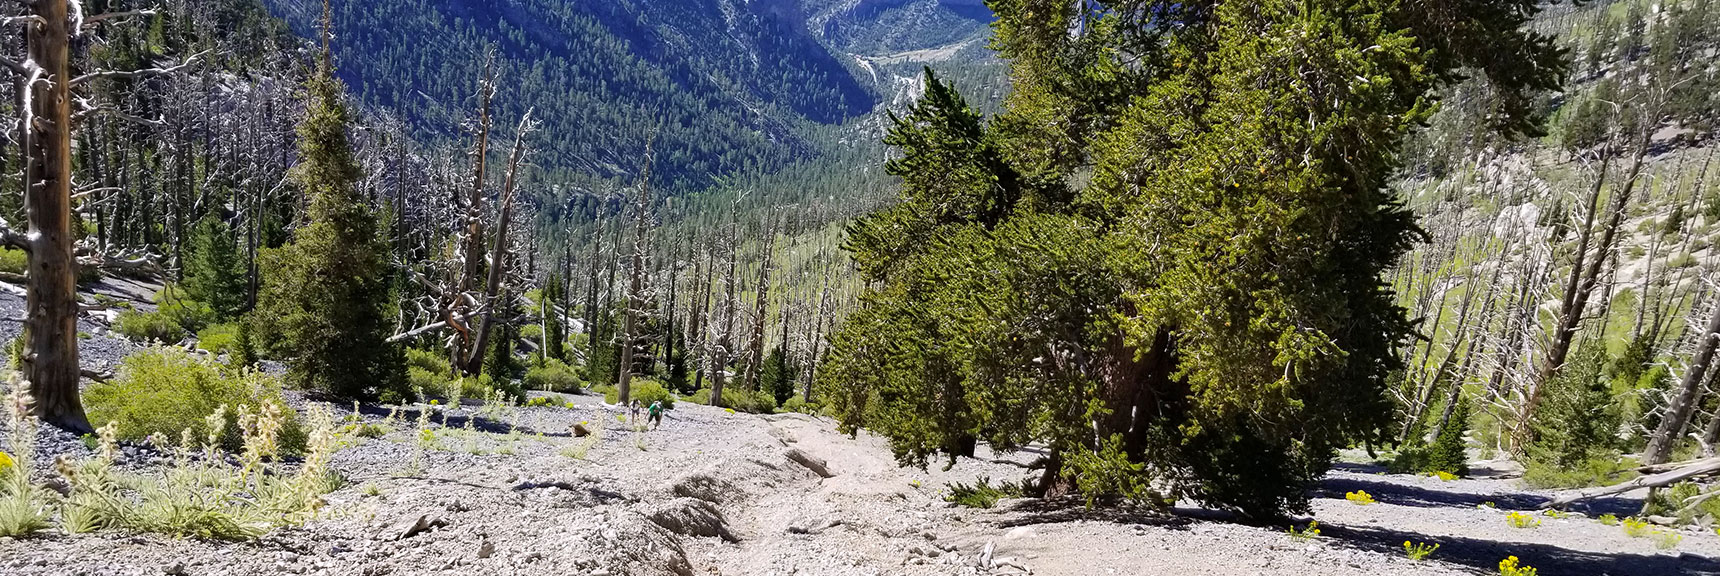 Looking Down the Avalanche Slope on Mummy Mt West Side in Mt Charleston Wilderness, Nevada